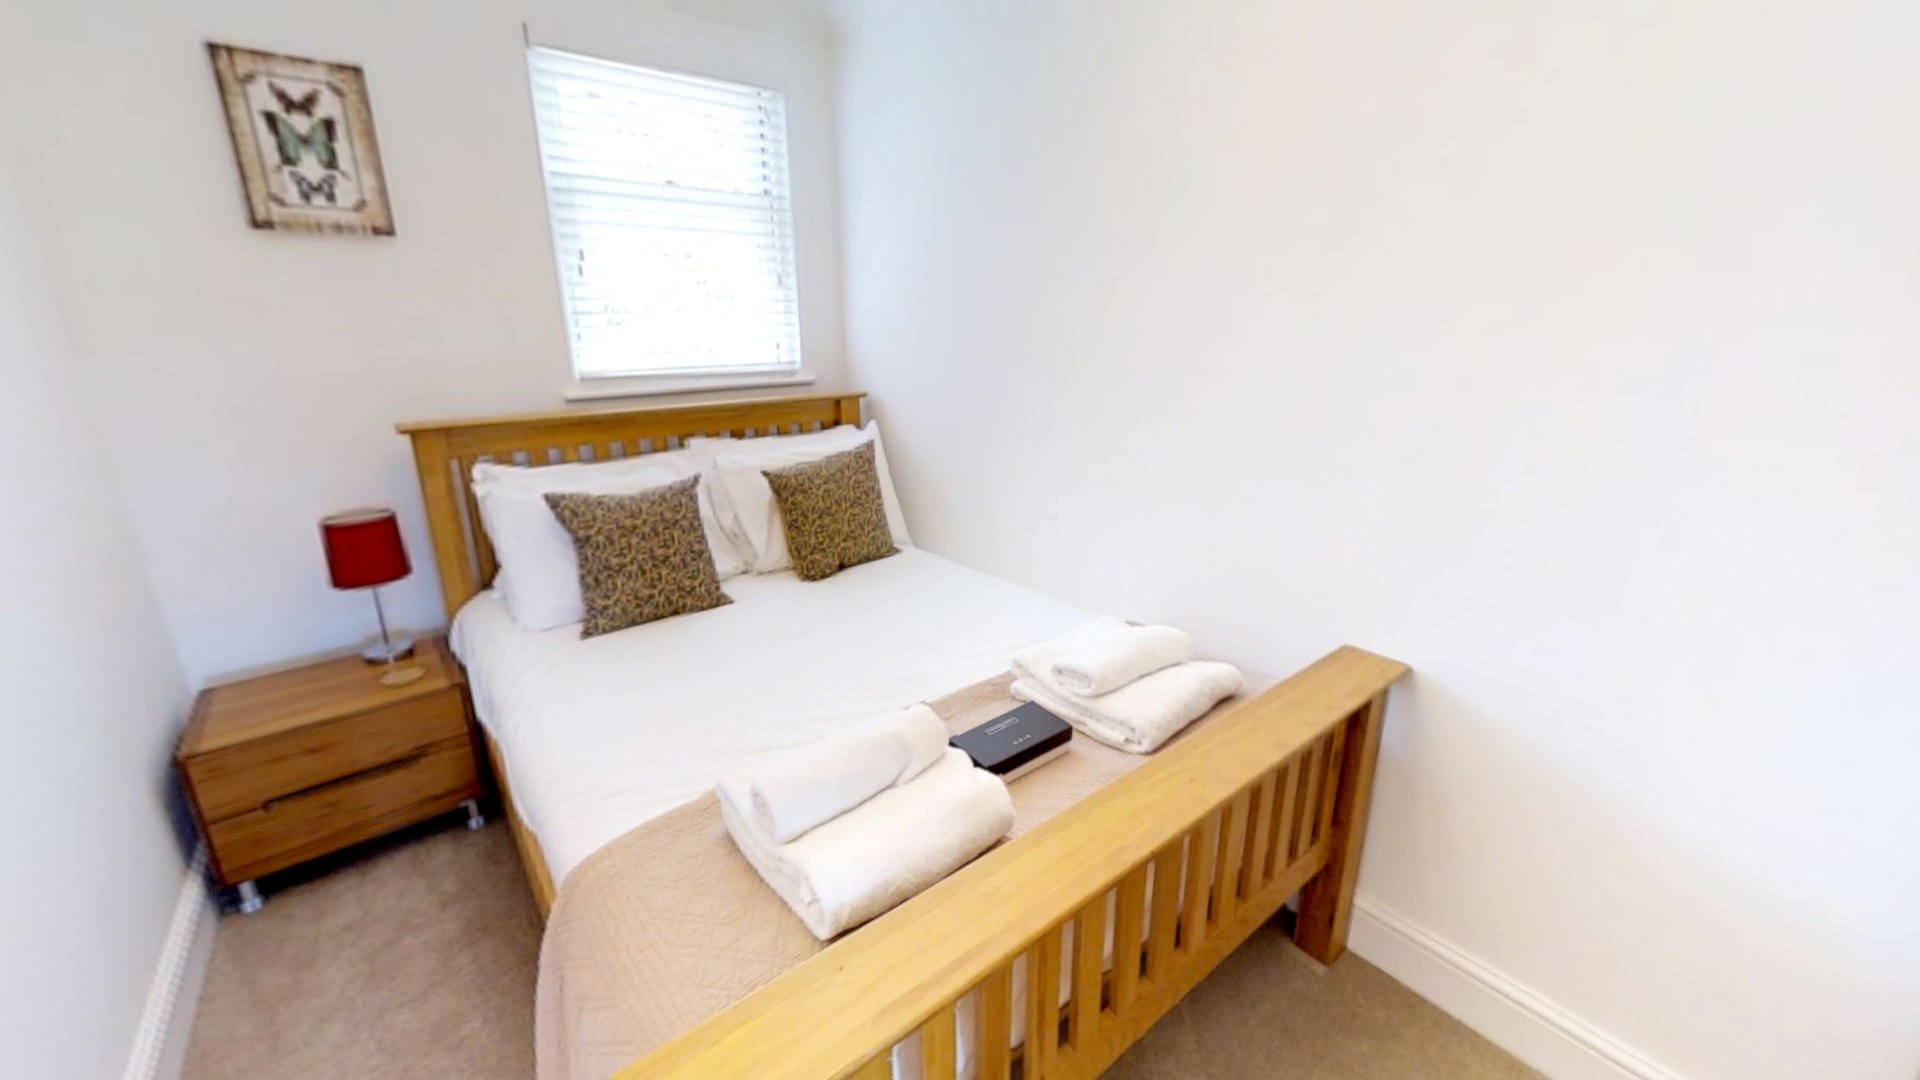 Looking-for-affordable-apartments-near-Cambridge-University?-why-not-book-our-lovely-Cambridge-University-Apartments.-Call-today-for-great-rates.